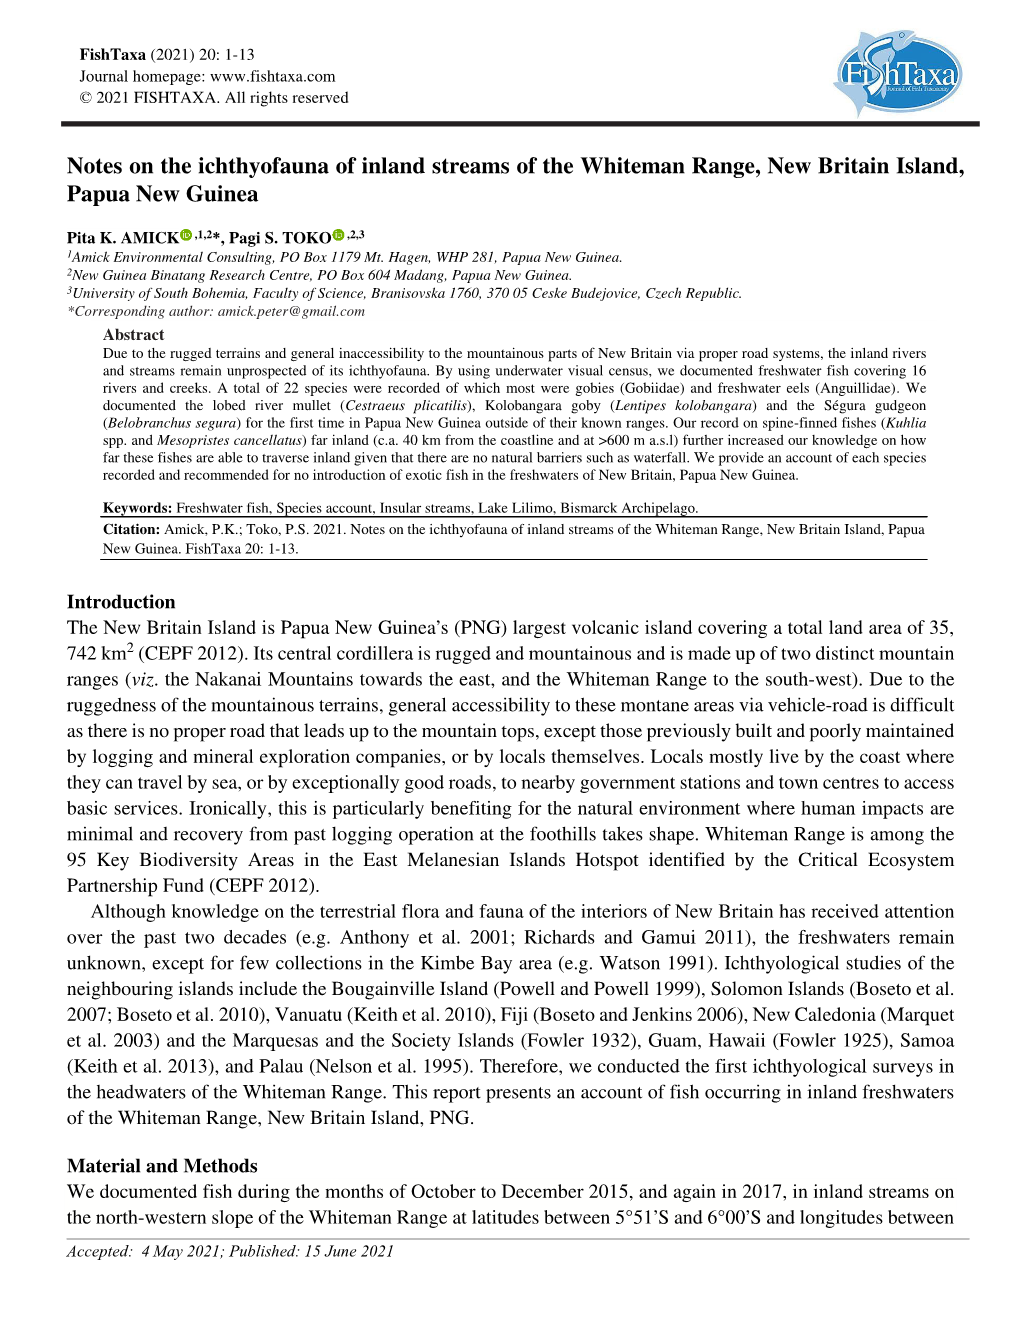 Notes on the Ichthyofauna of Inland Streams of the Whiteman Range, New Britain Island, Papua New Guinea